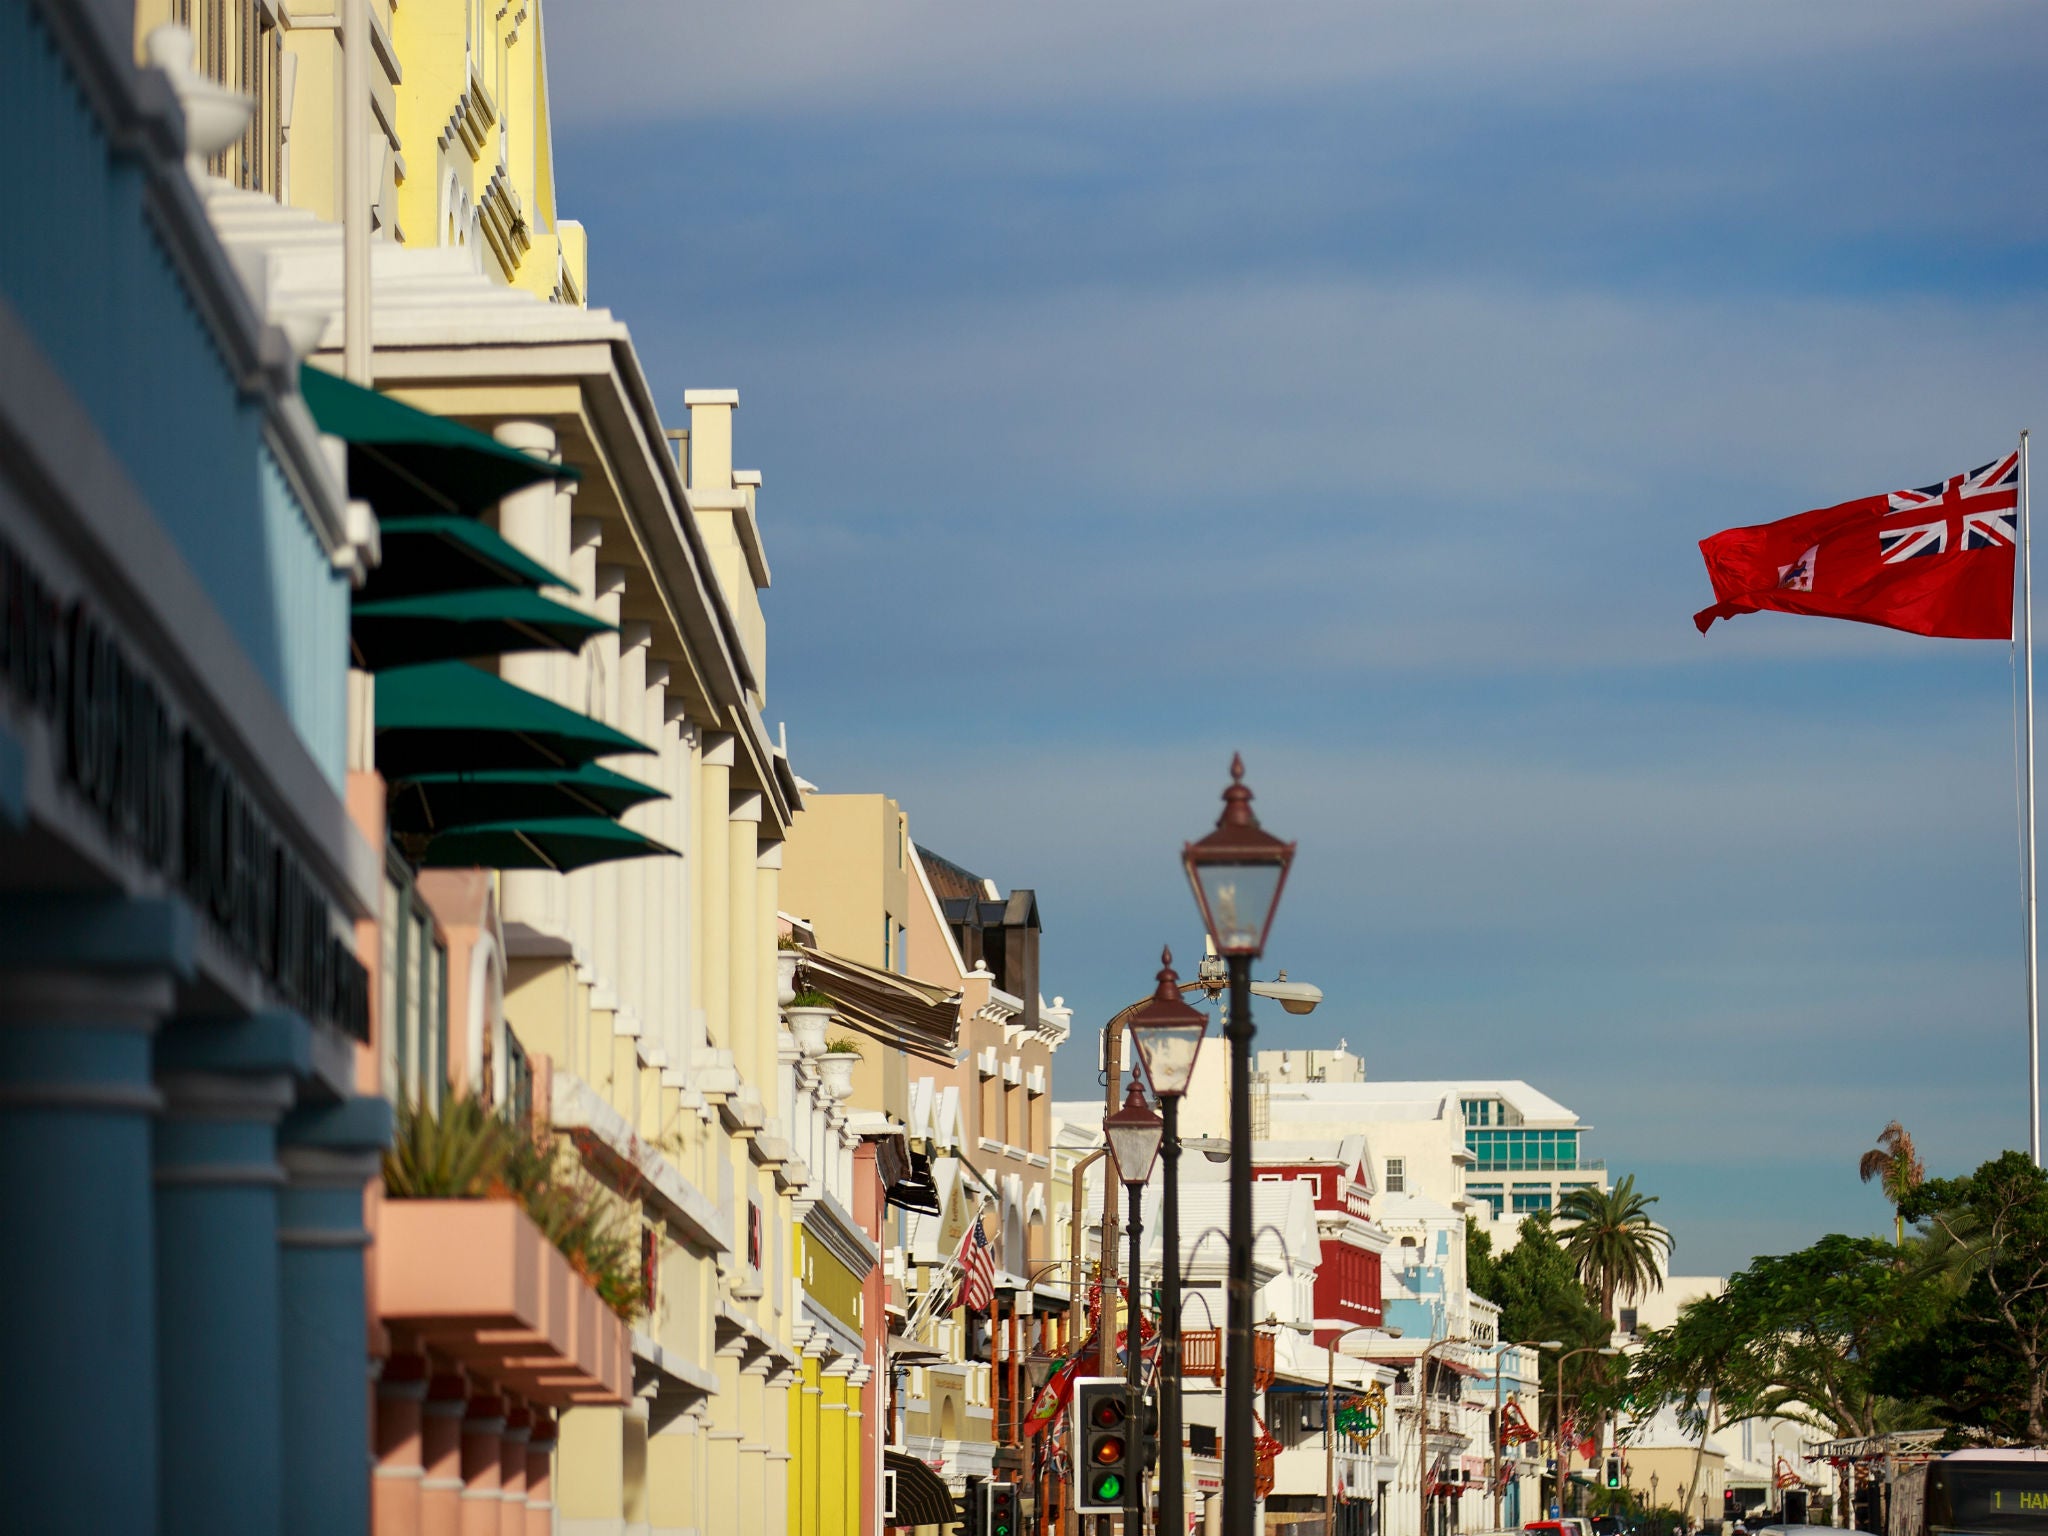 The flag of Bermuda flies along the commercial and retail district on Front Street, in Hamilton, Bermuda